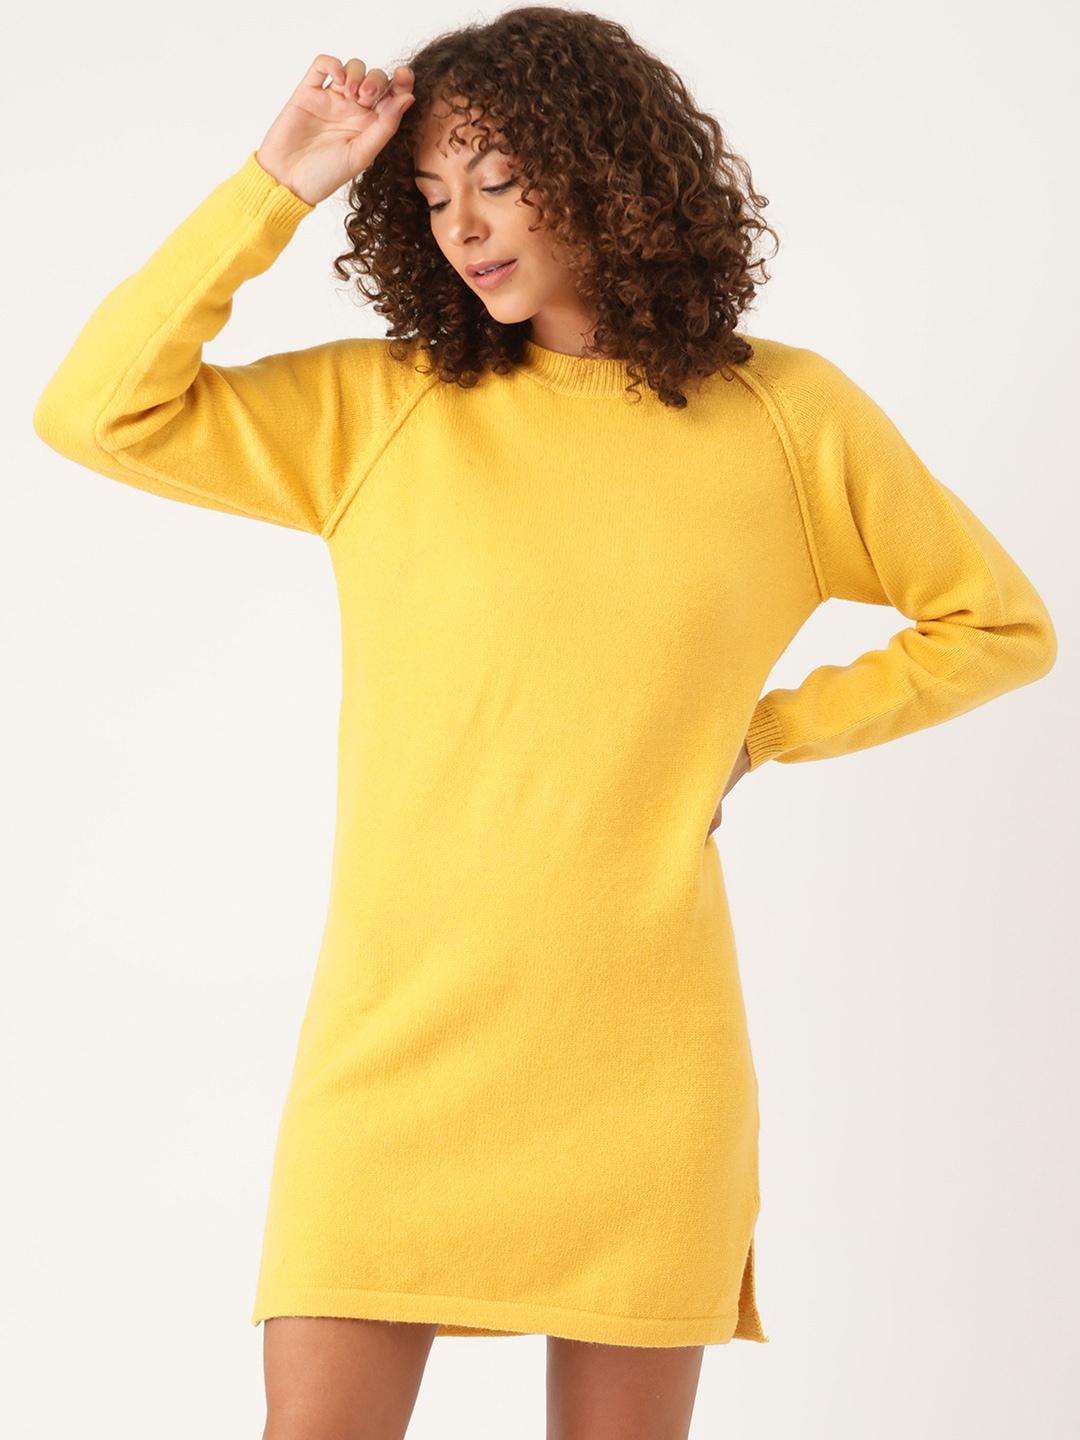 AND Mustard Yellow Solid Sweater Dress